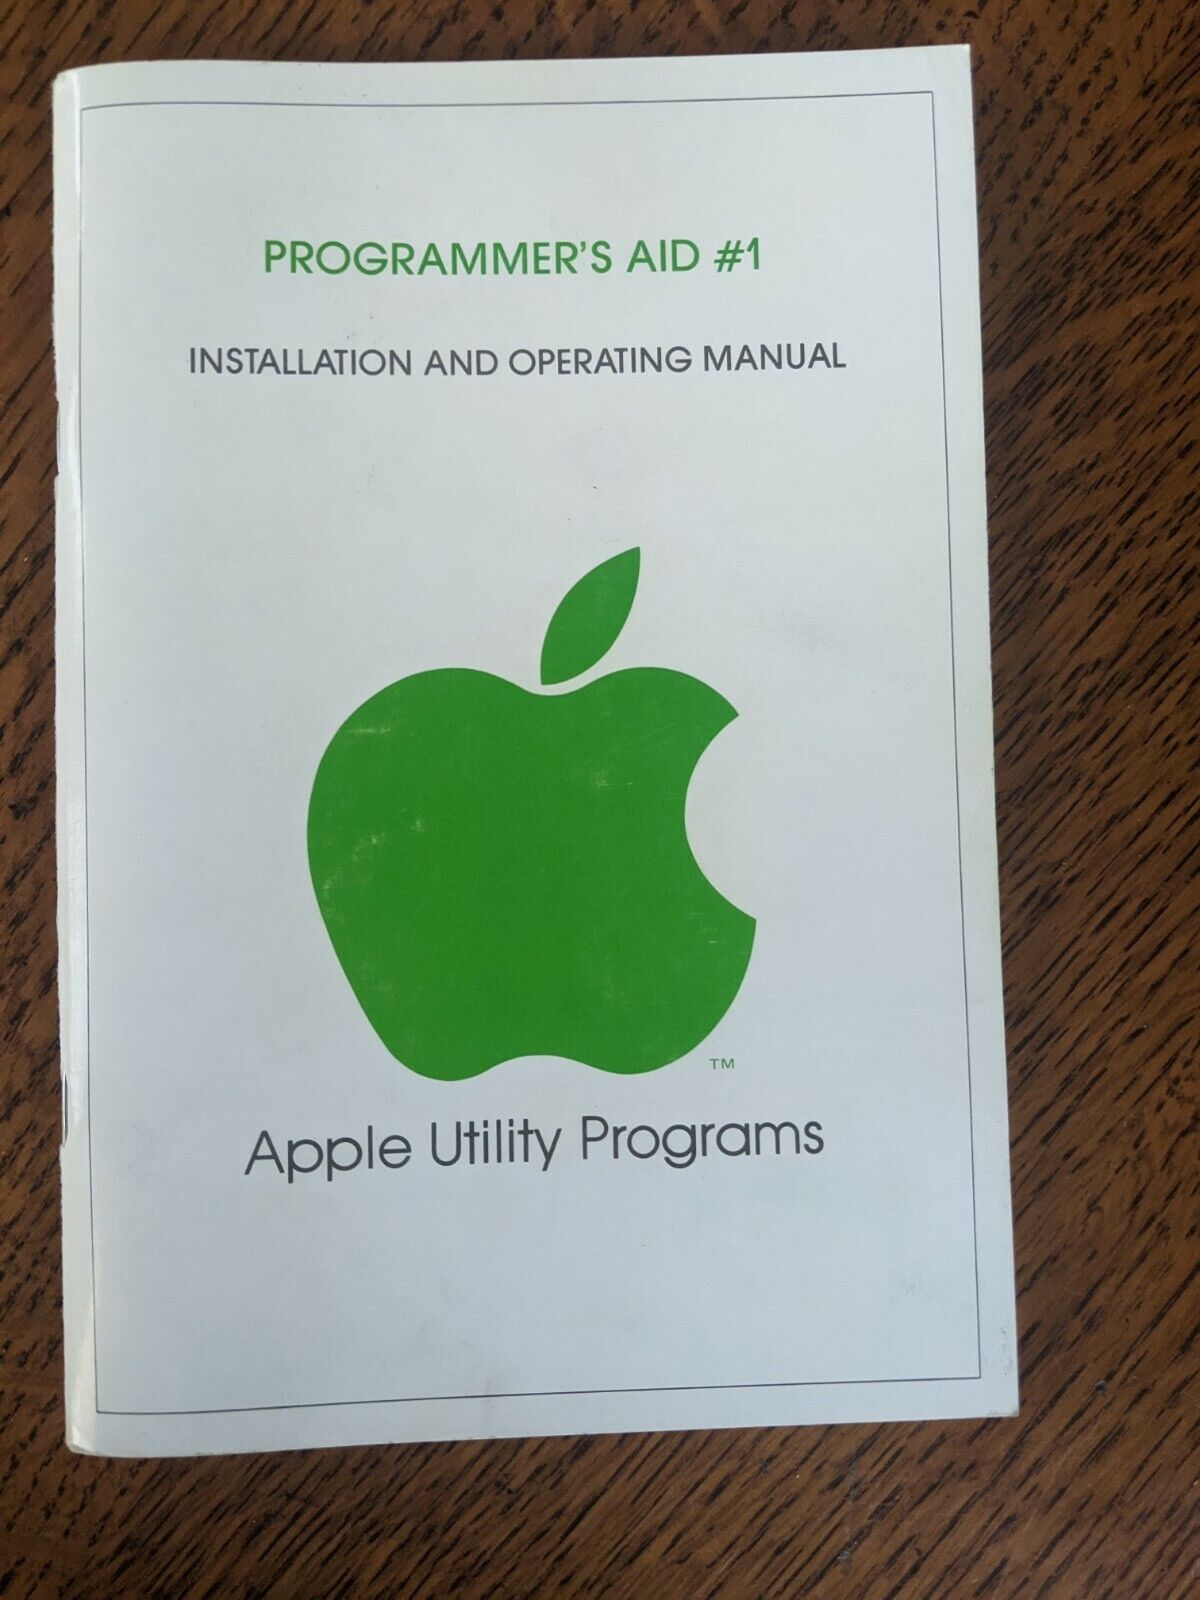 Vintage 1978 Apple (Computer) Programmer\'s AID #1 Manual [VGC] A2L0011 Very Rare